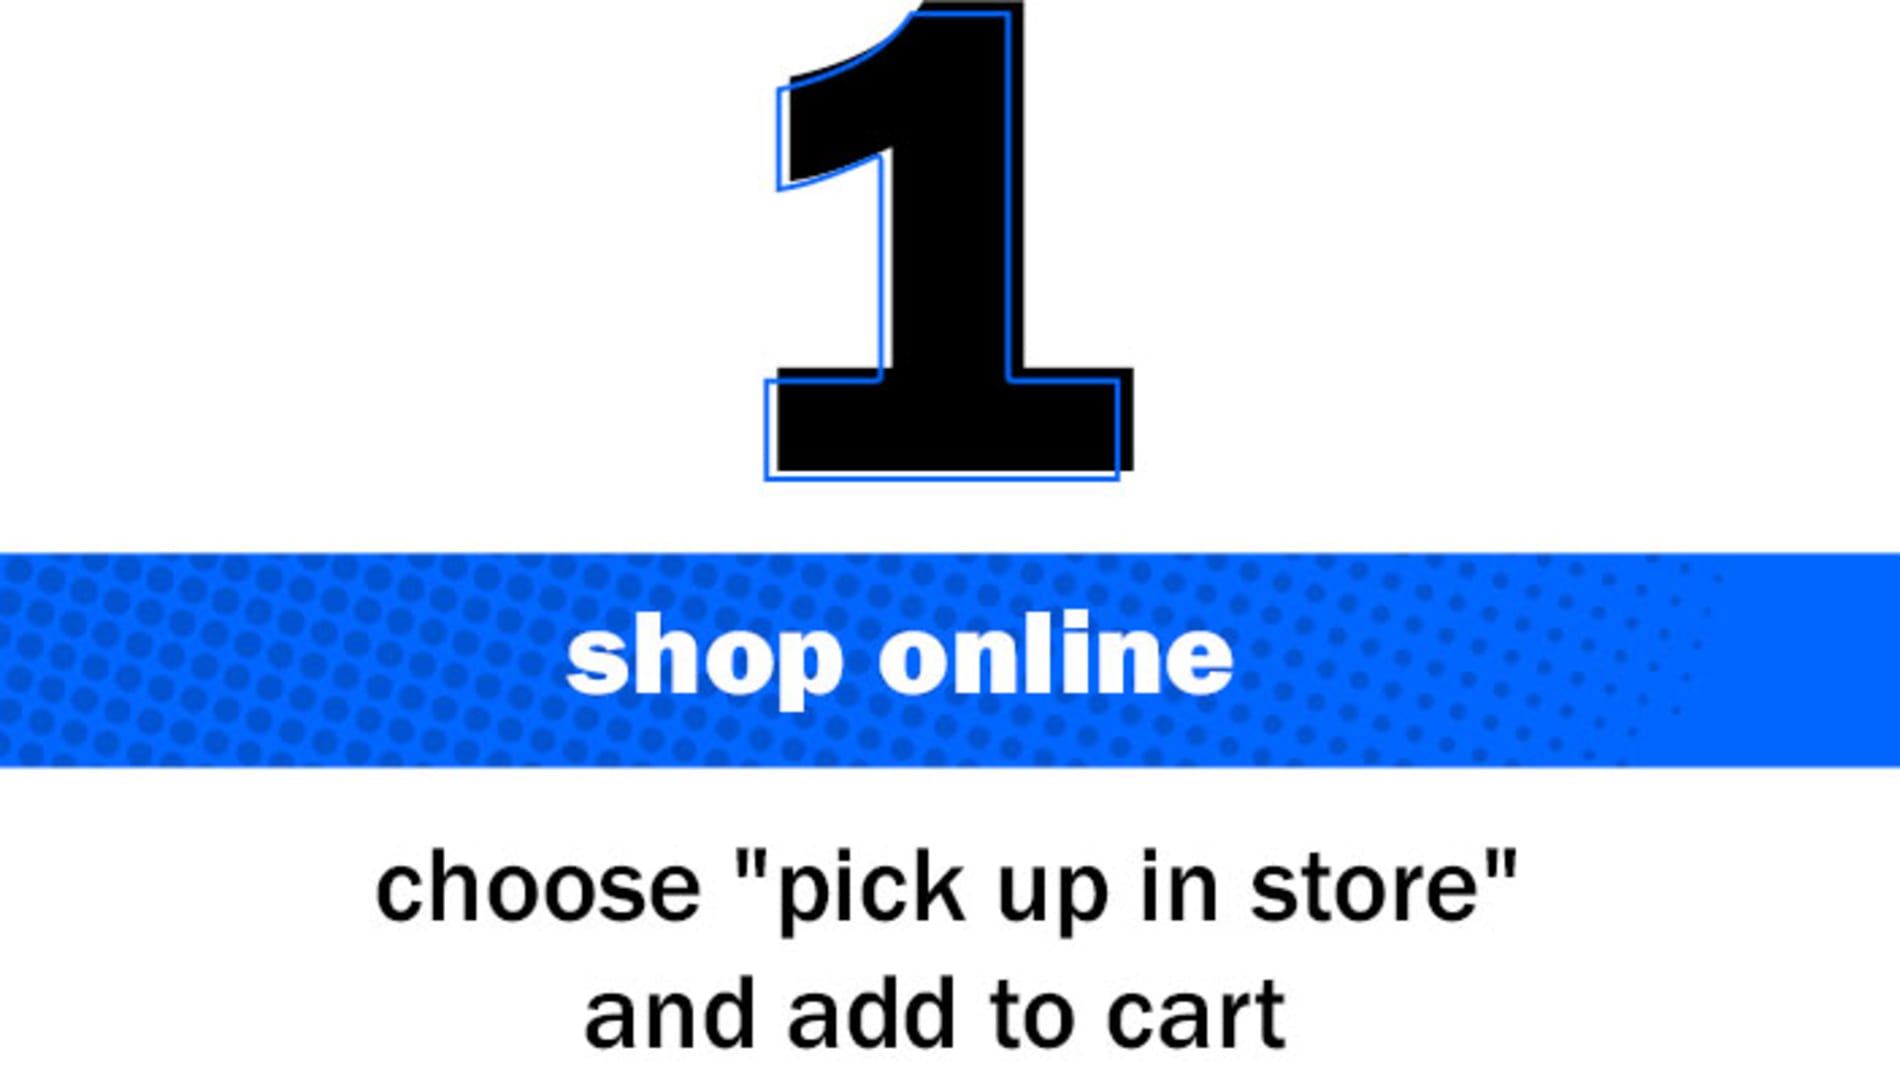 1. Shop Online. Choose "pick up in store" and add to cart